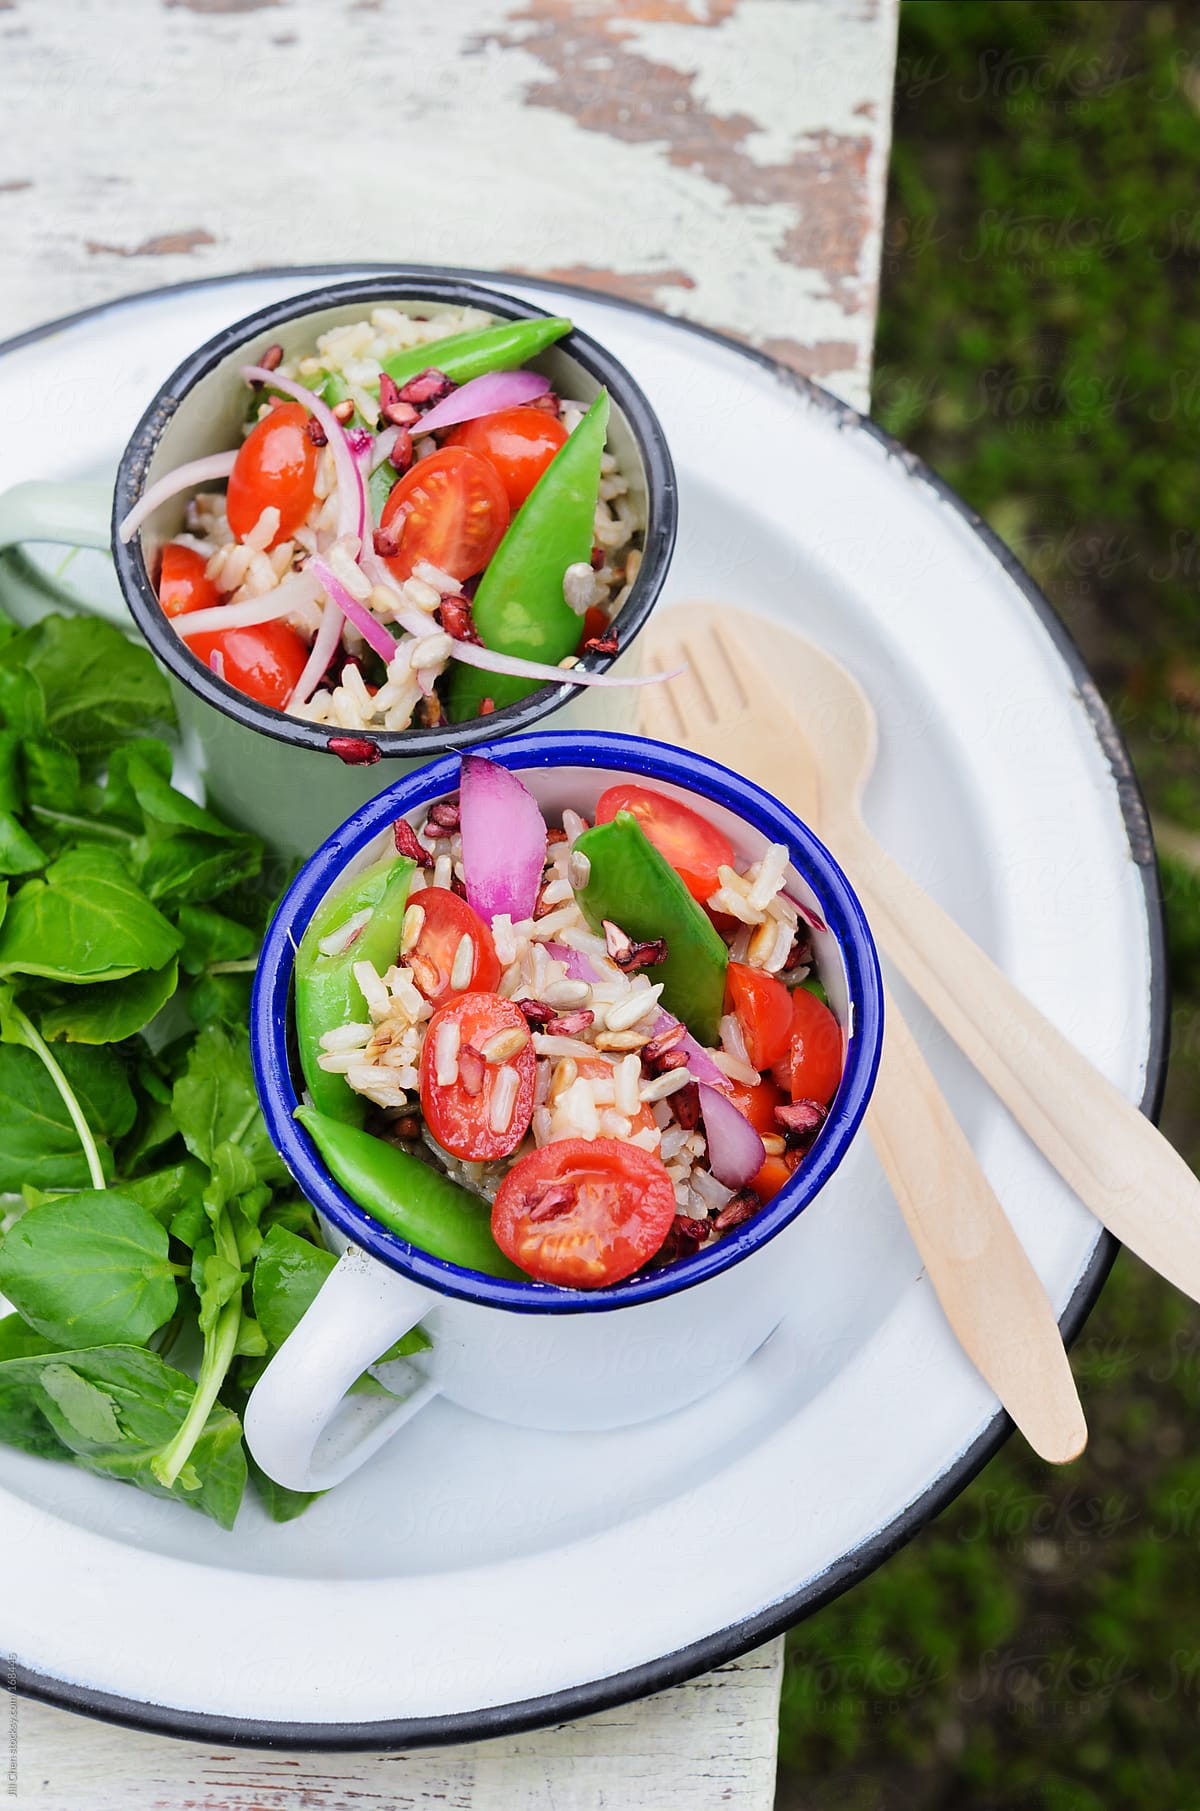 Light healthy lunch rice salad outdoors